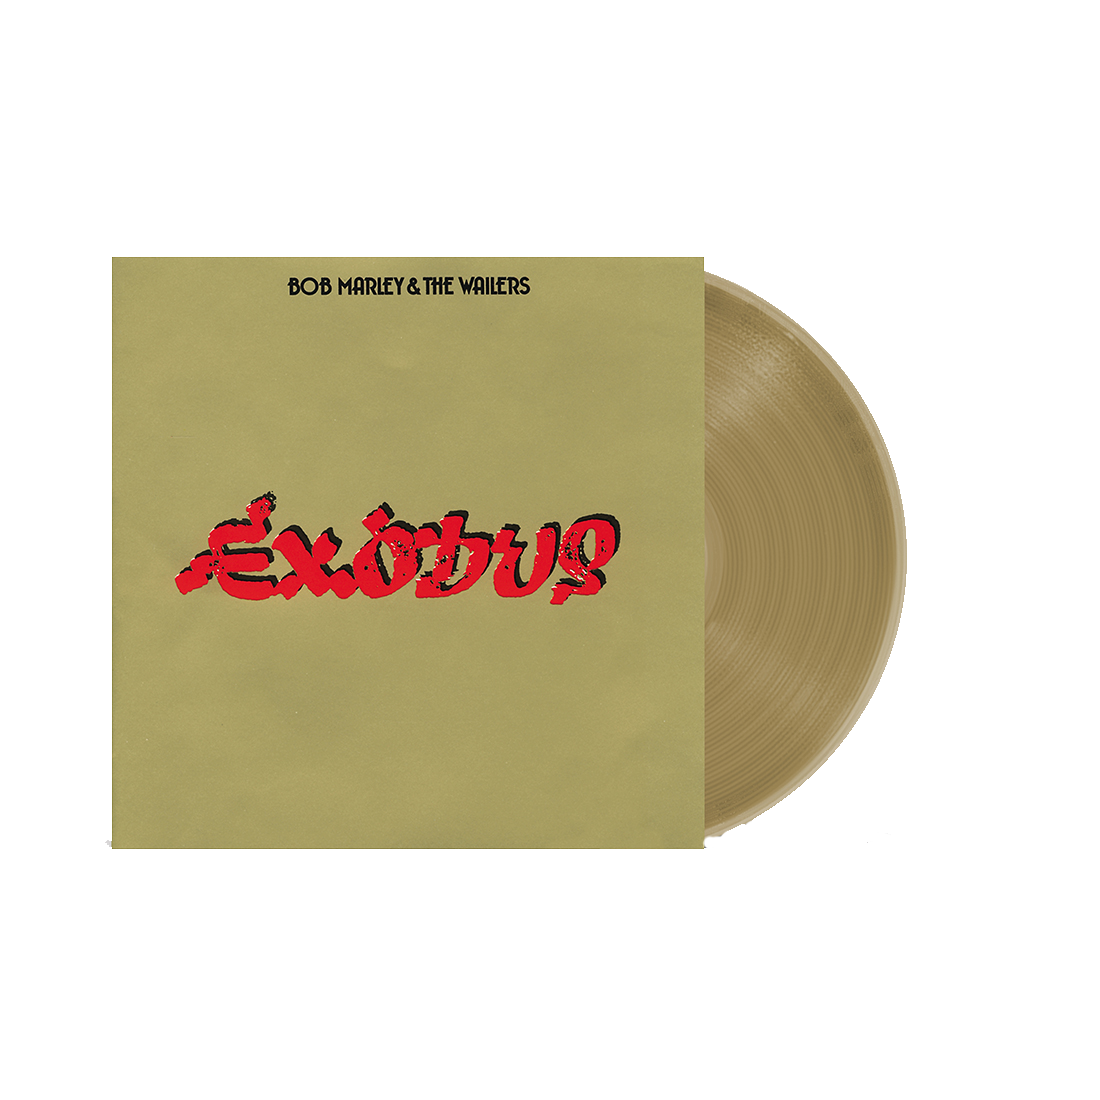 Bob Marley and The Wailers - Exodus: Exclusive Gold Vinyl LP - uDiscover